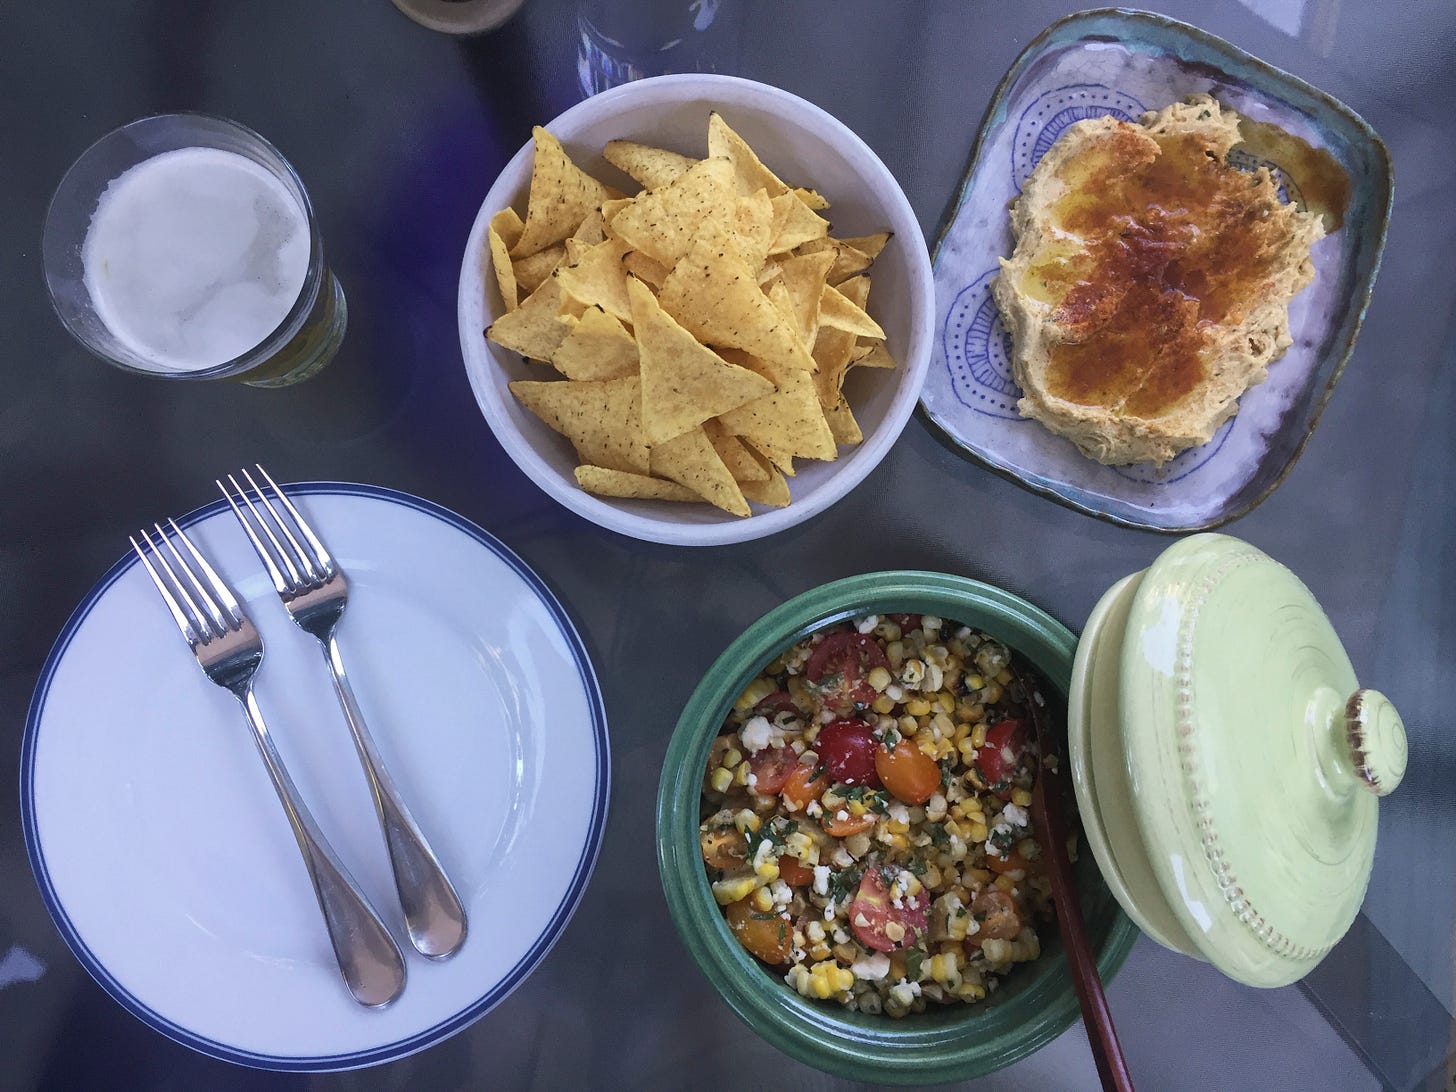 An arrangement of serving dishes with tortilla chips, the corn salad, and hummus with oil and spices on top. A plate and a glass of beer are in the left side of the frame.